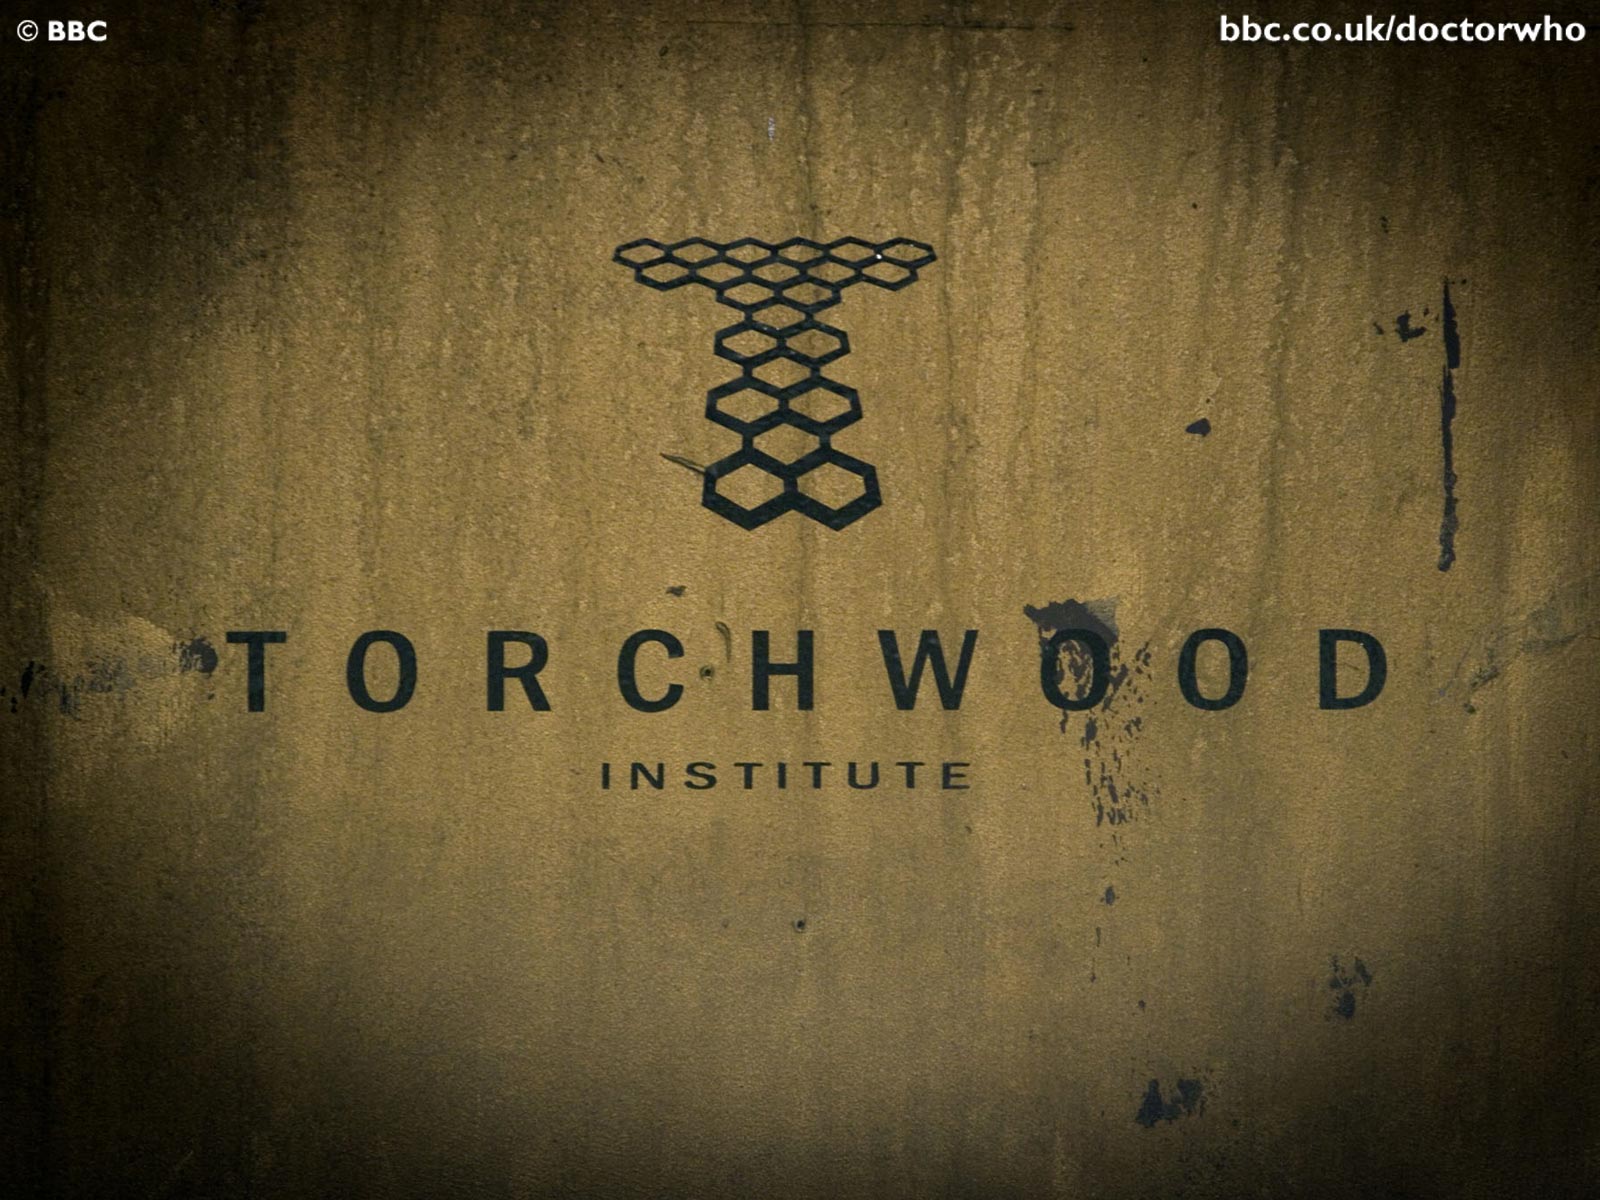 doctor who, torchwood, tv show Full HD